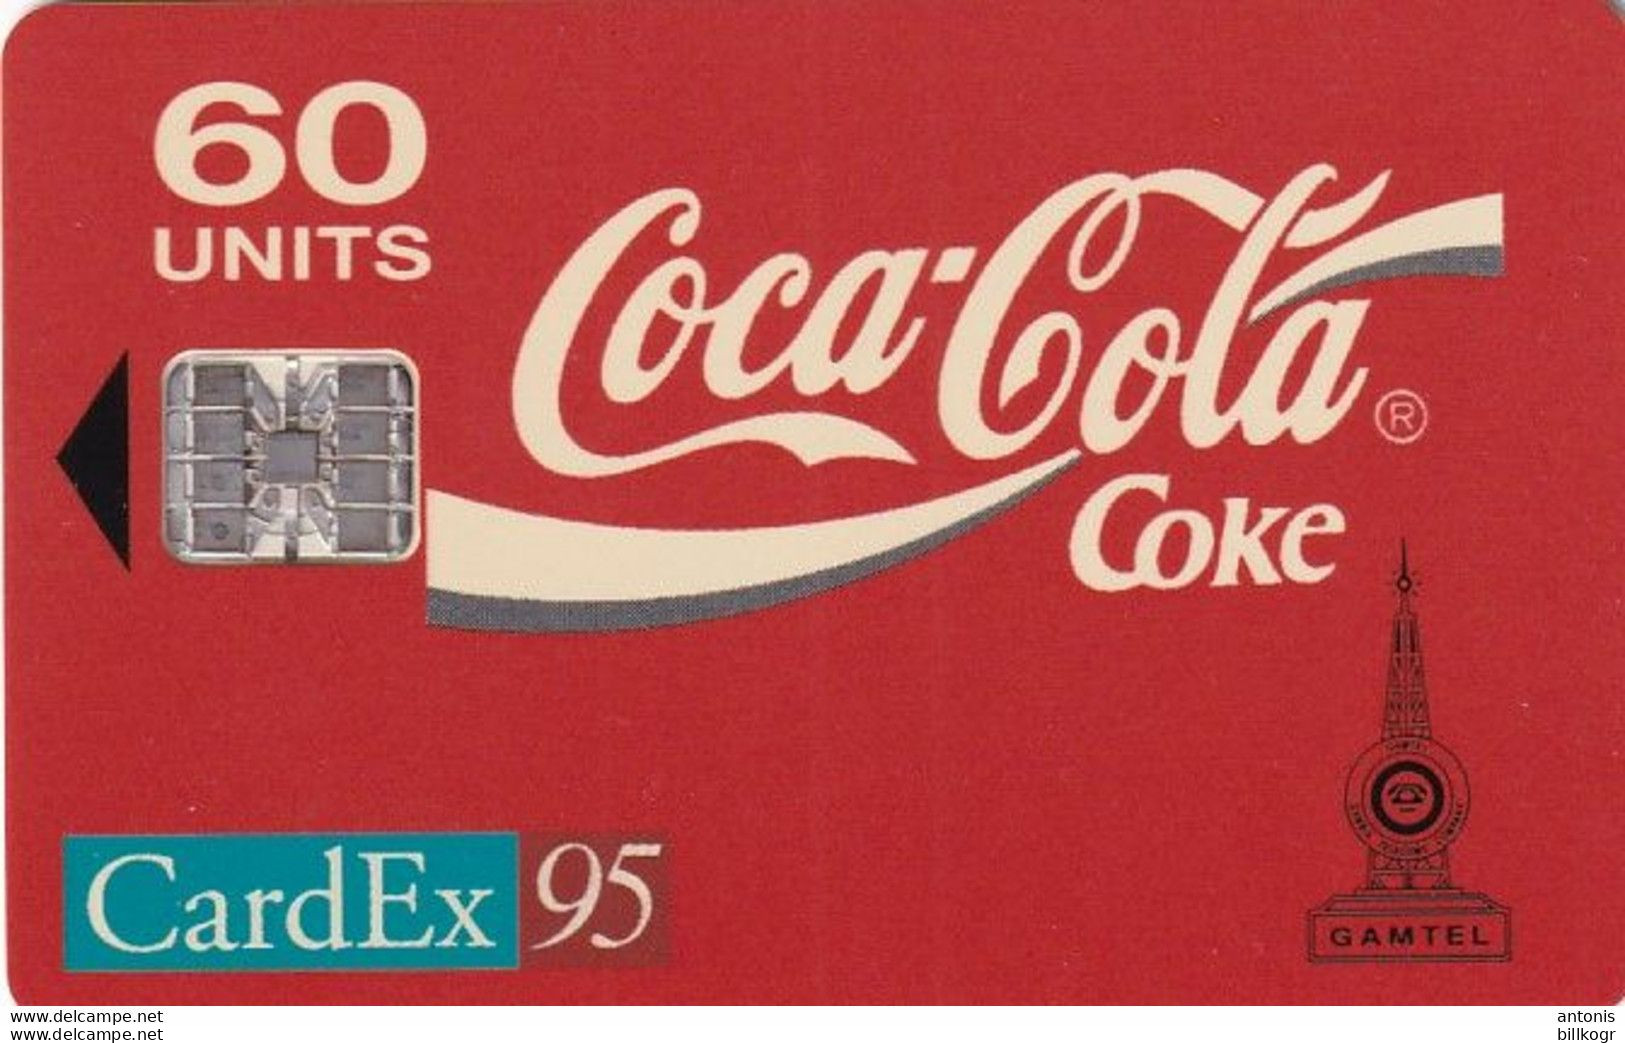 GAMBIA - Coca Cola, CardEx 95 Maastricht, Tirage 2000, Used - Gambie